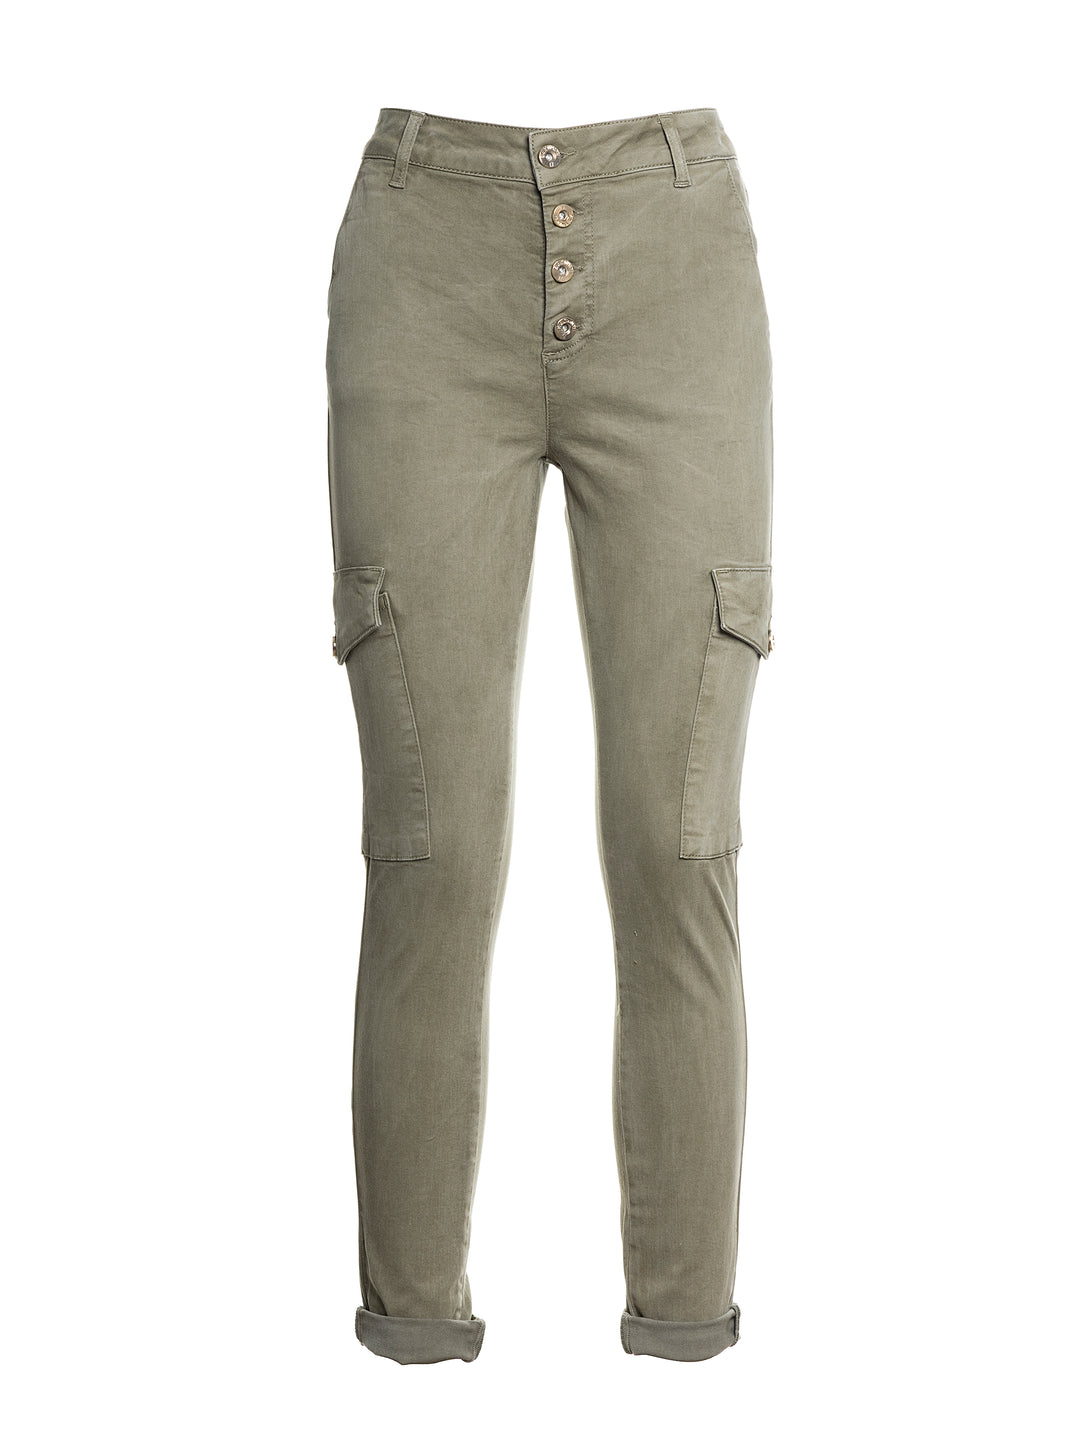 Cargo pant slim fit with big pockets